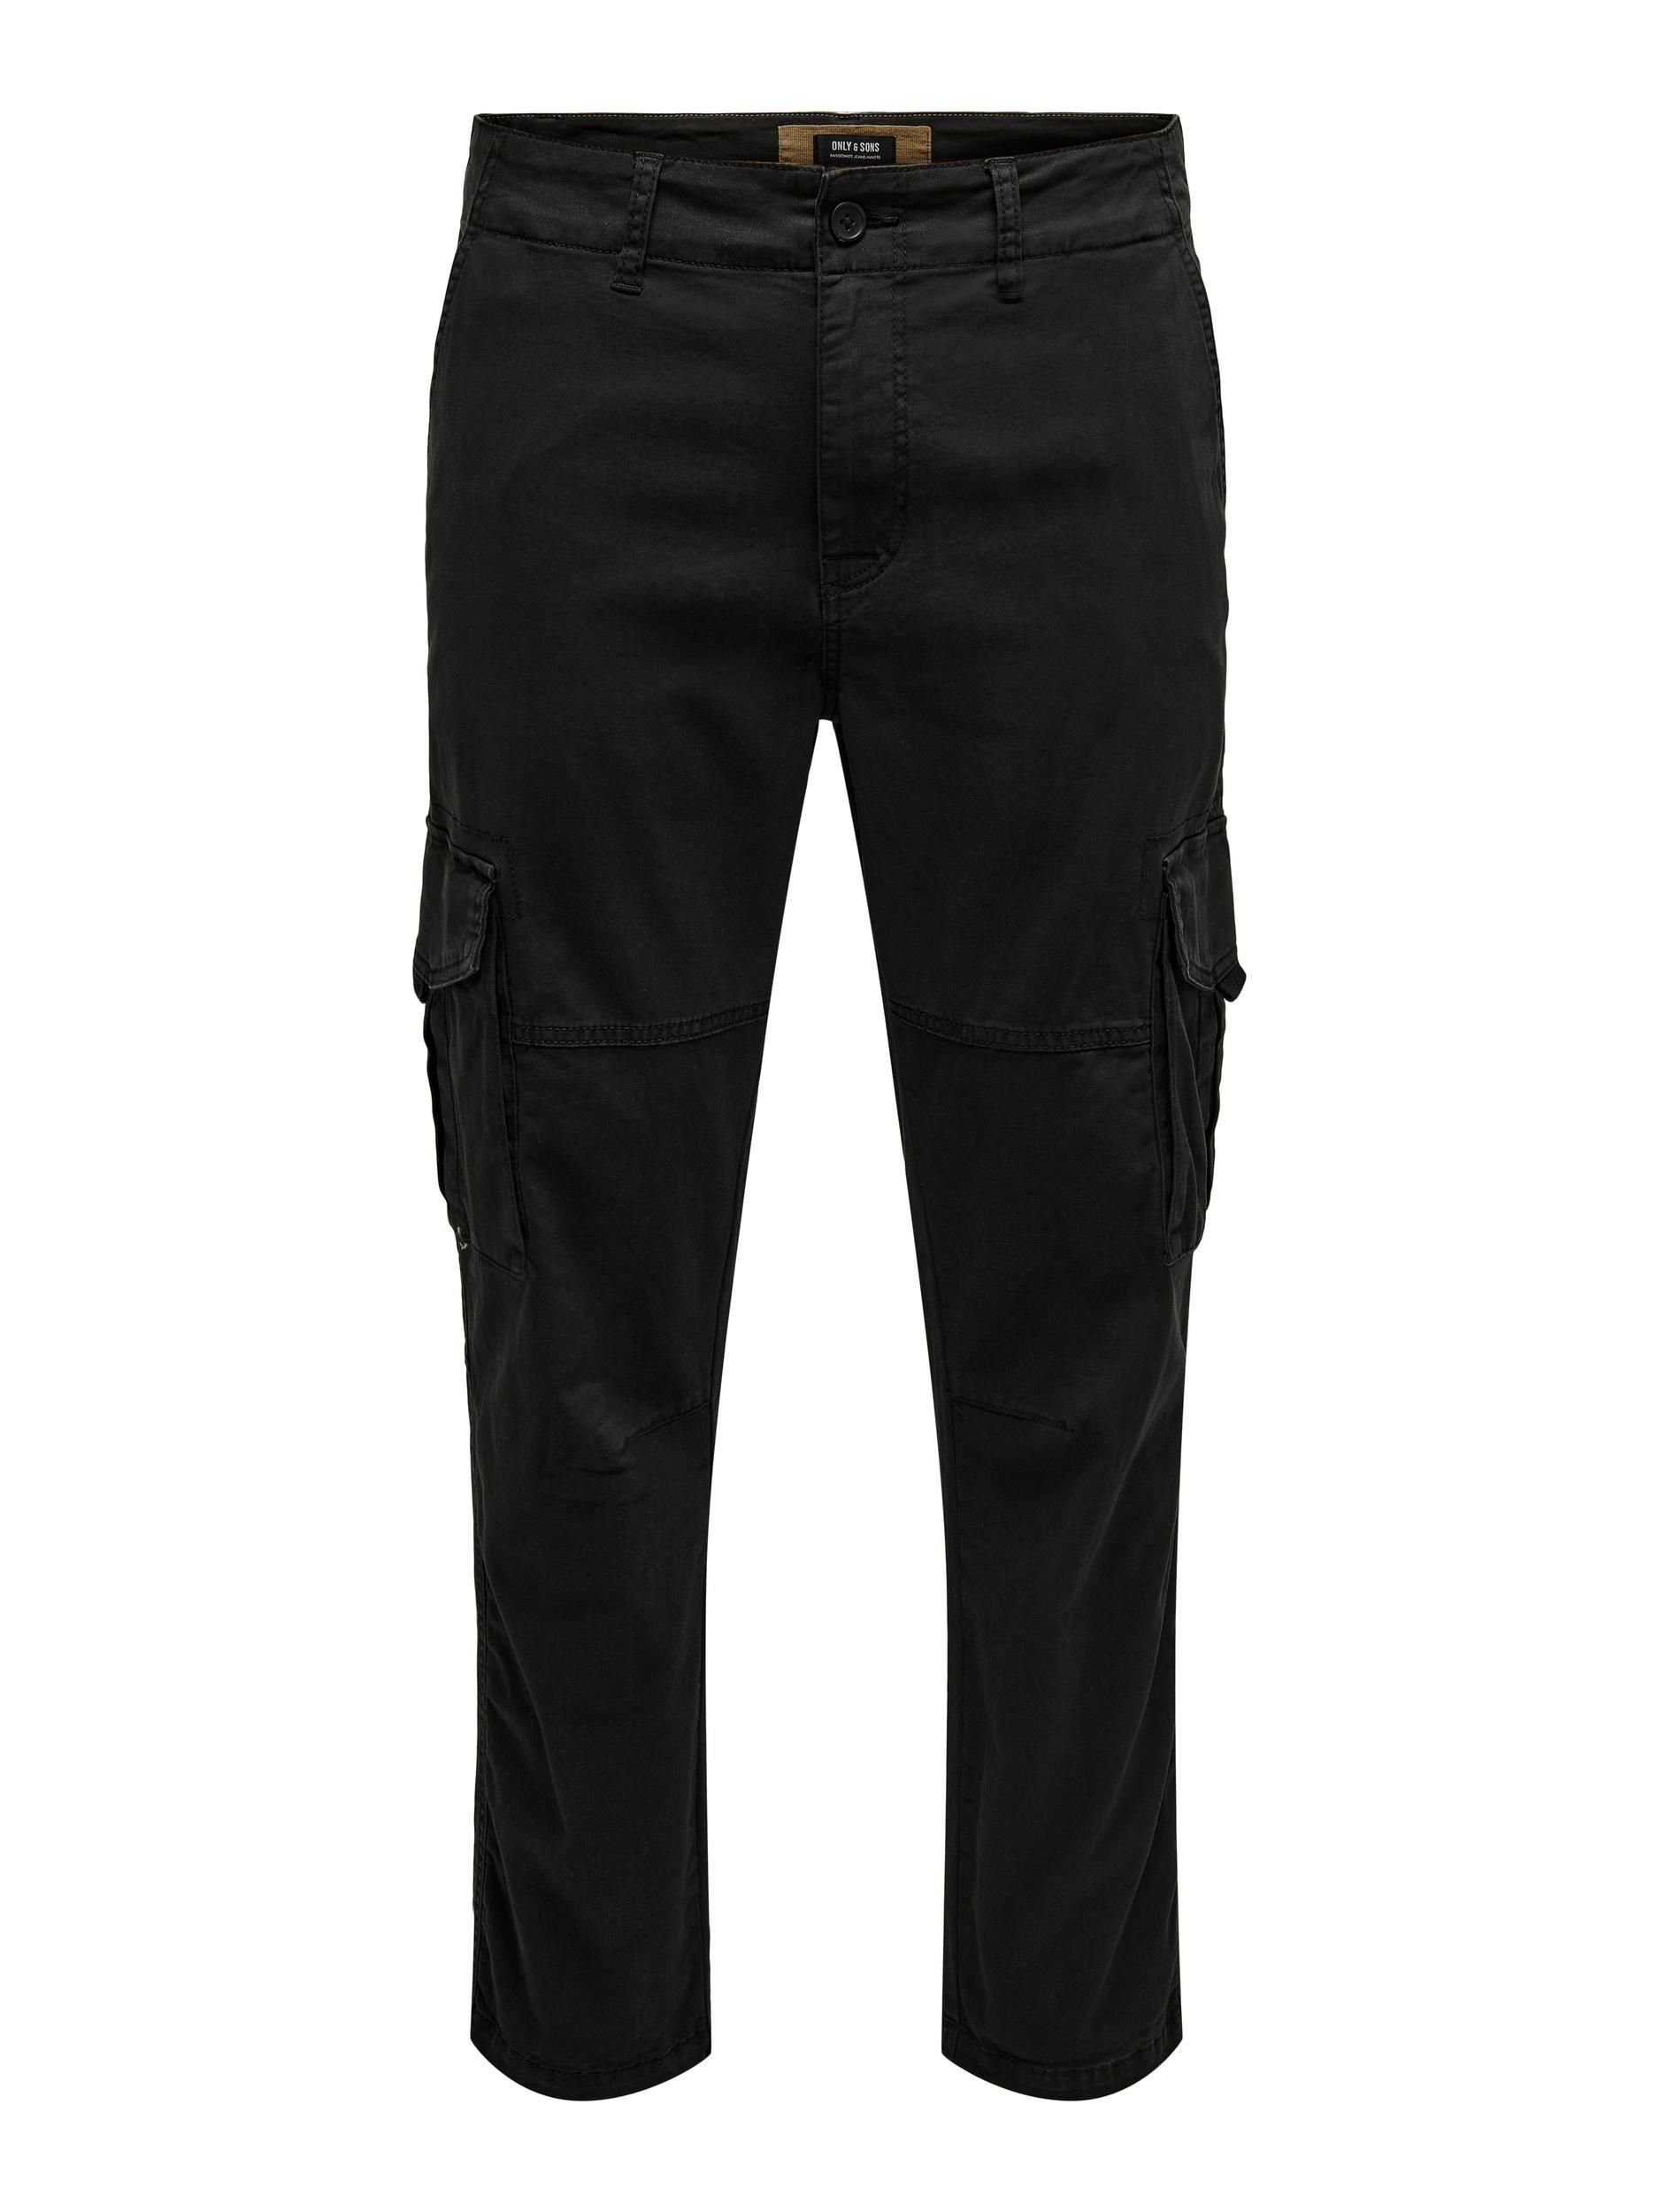 ONLY & SONS Chinos black